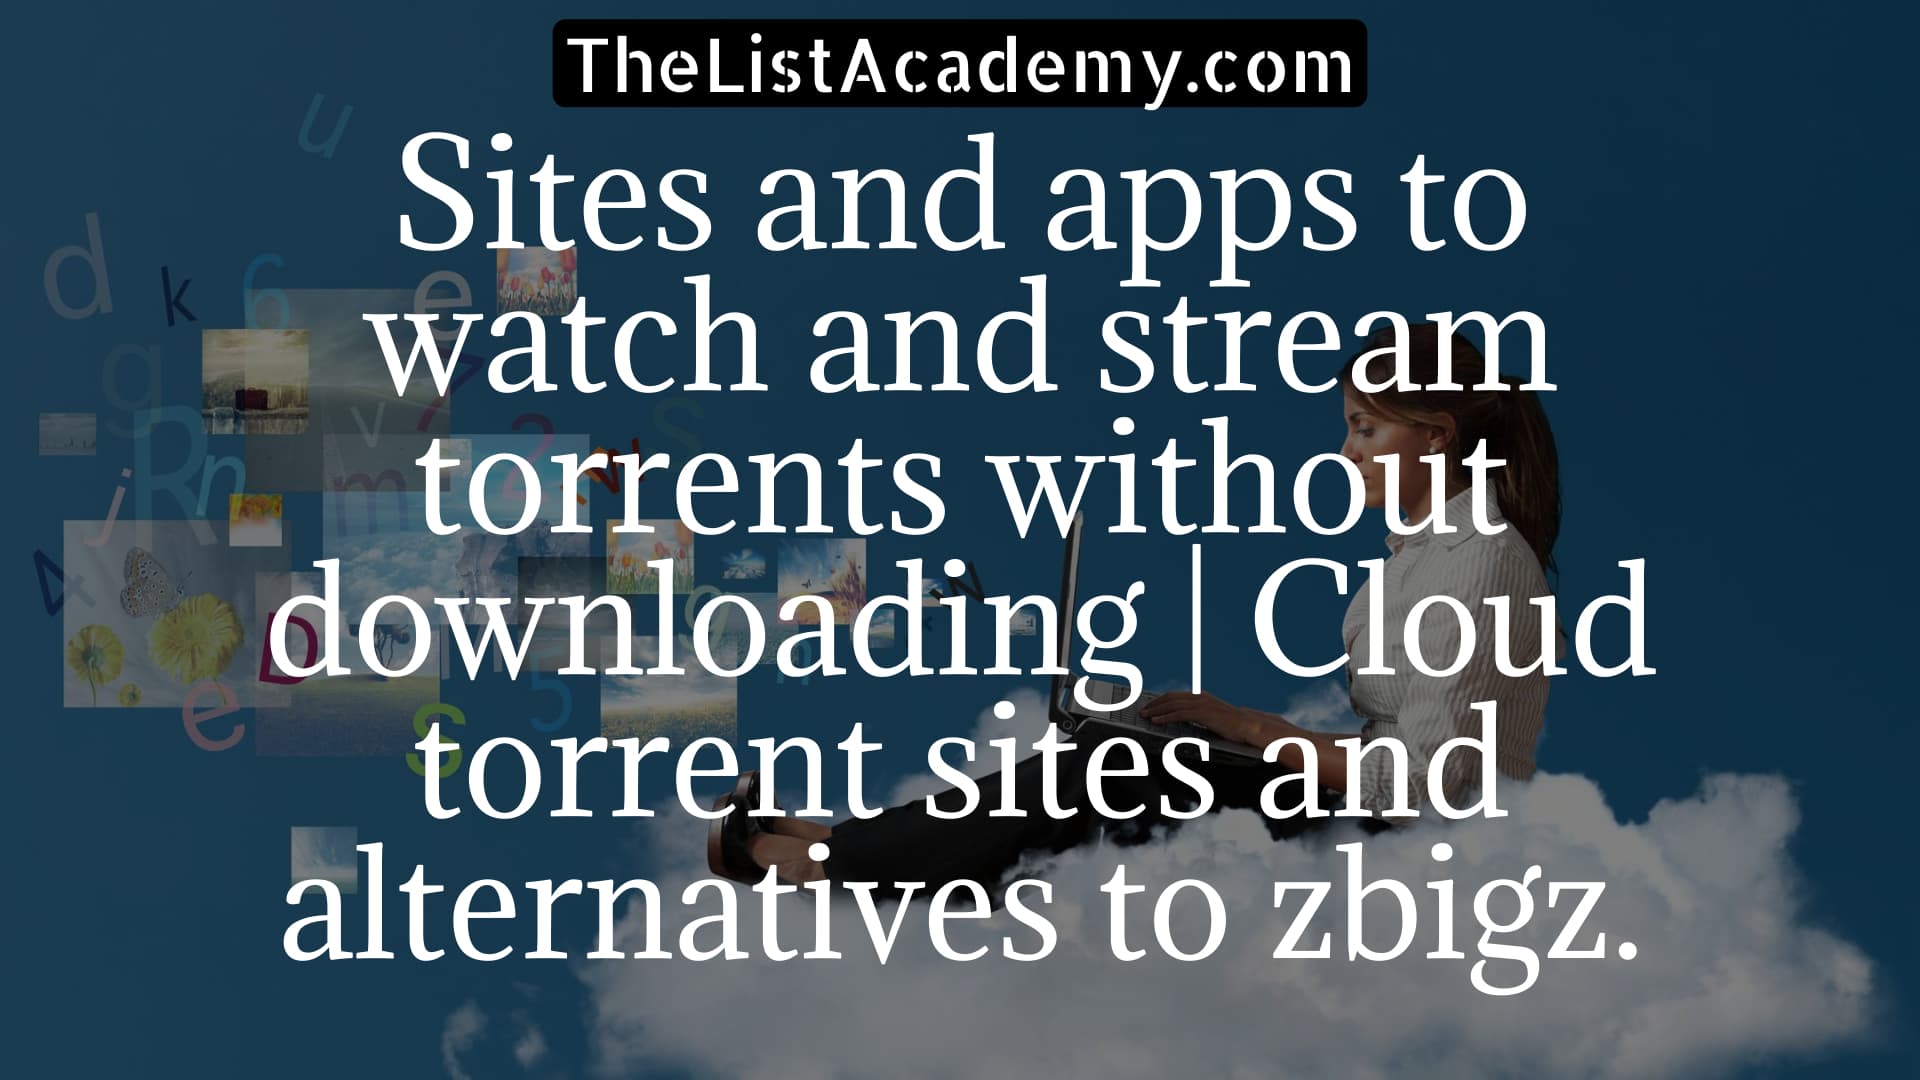 Cover Image For List : 29 Sites And Apps To Watch And Stream Torrents Without Downloading | Cloud Torrent Sites And Alternatives To Zbigz.